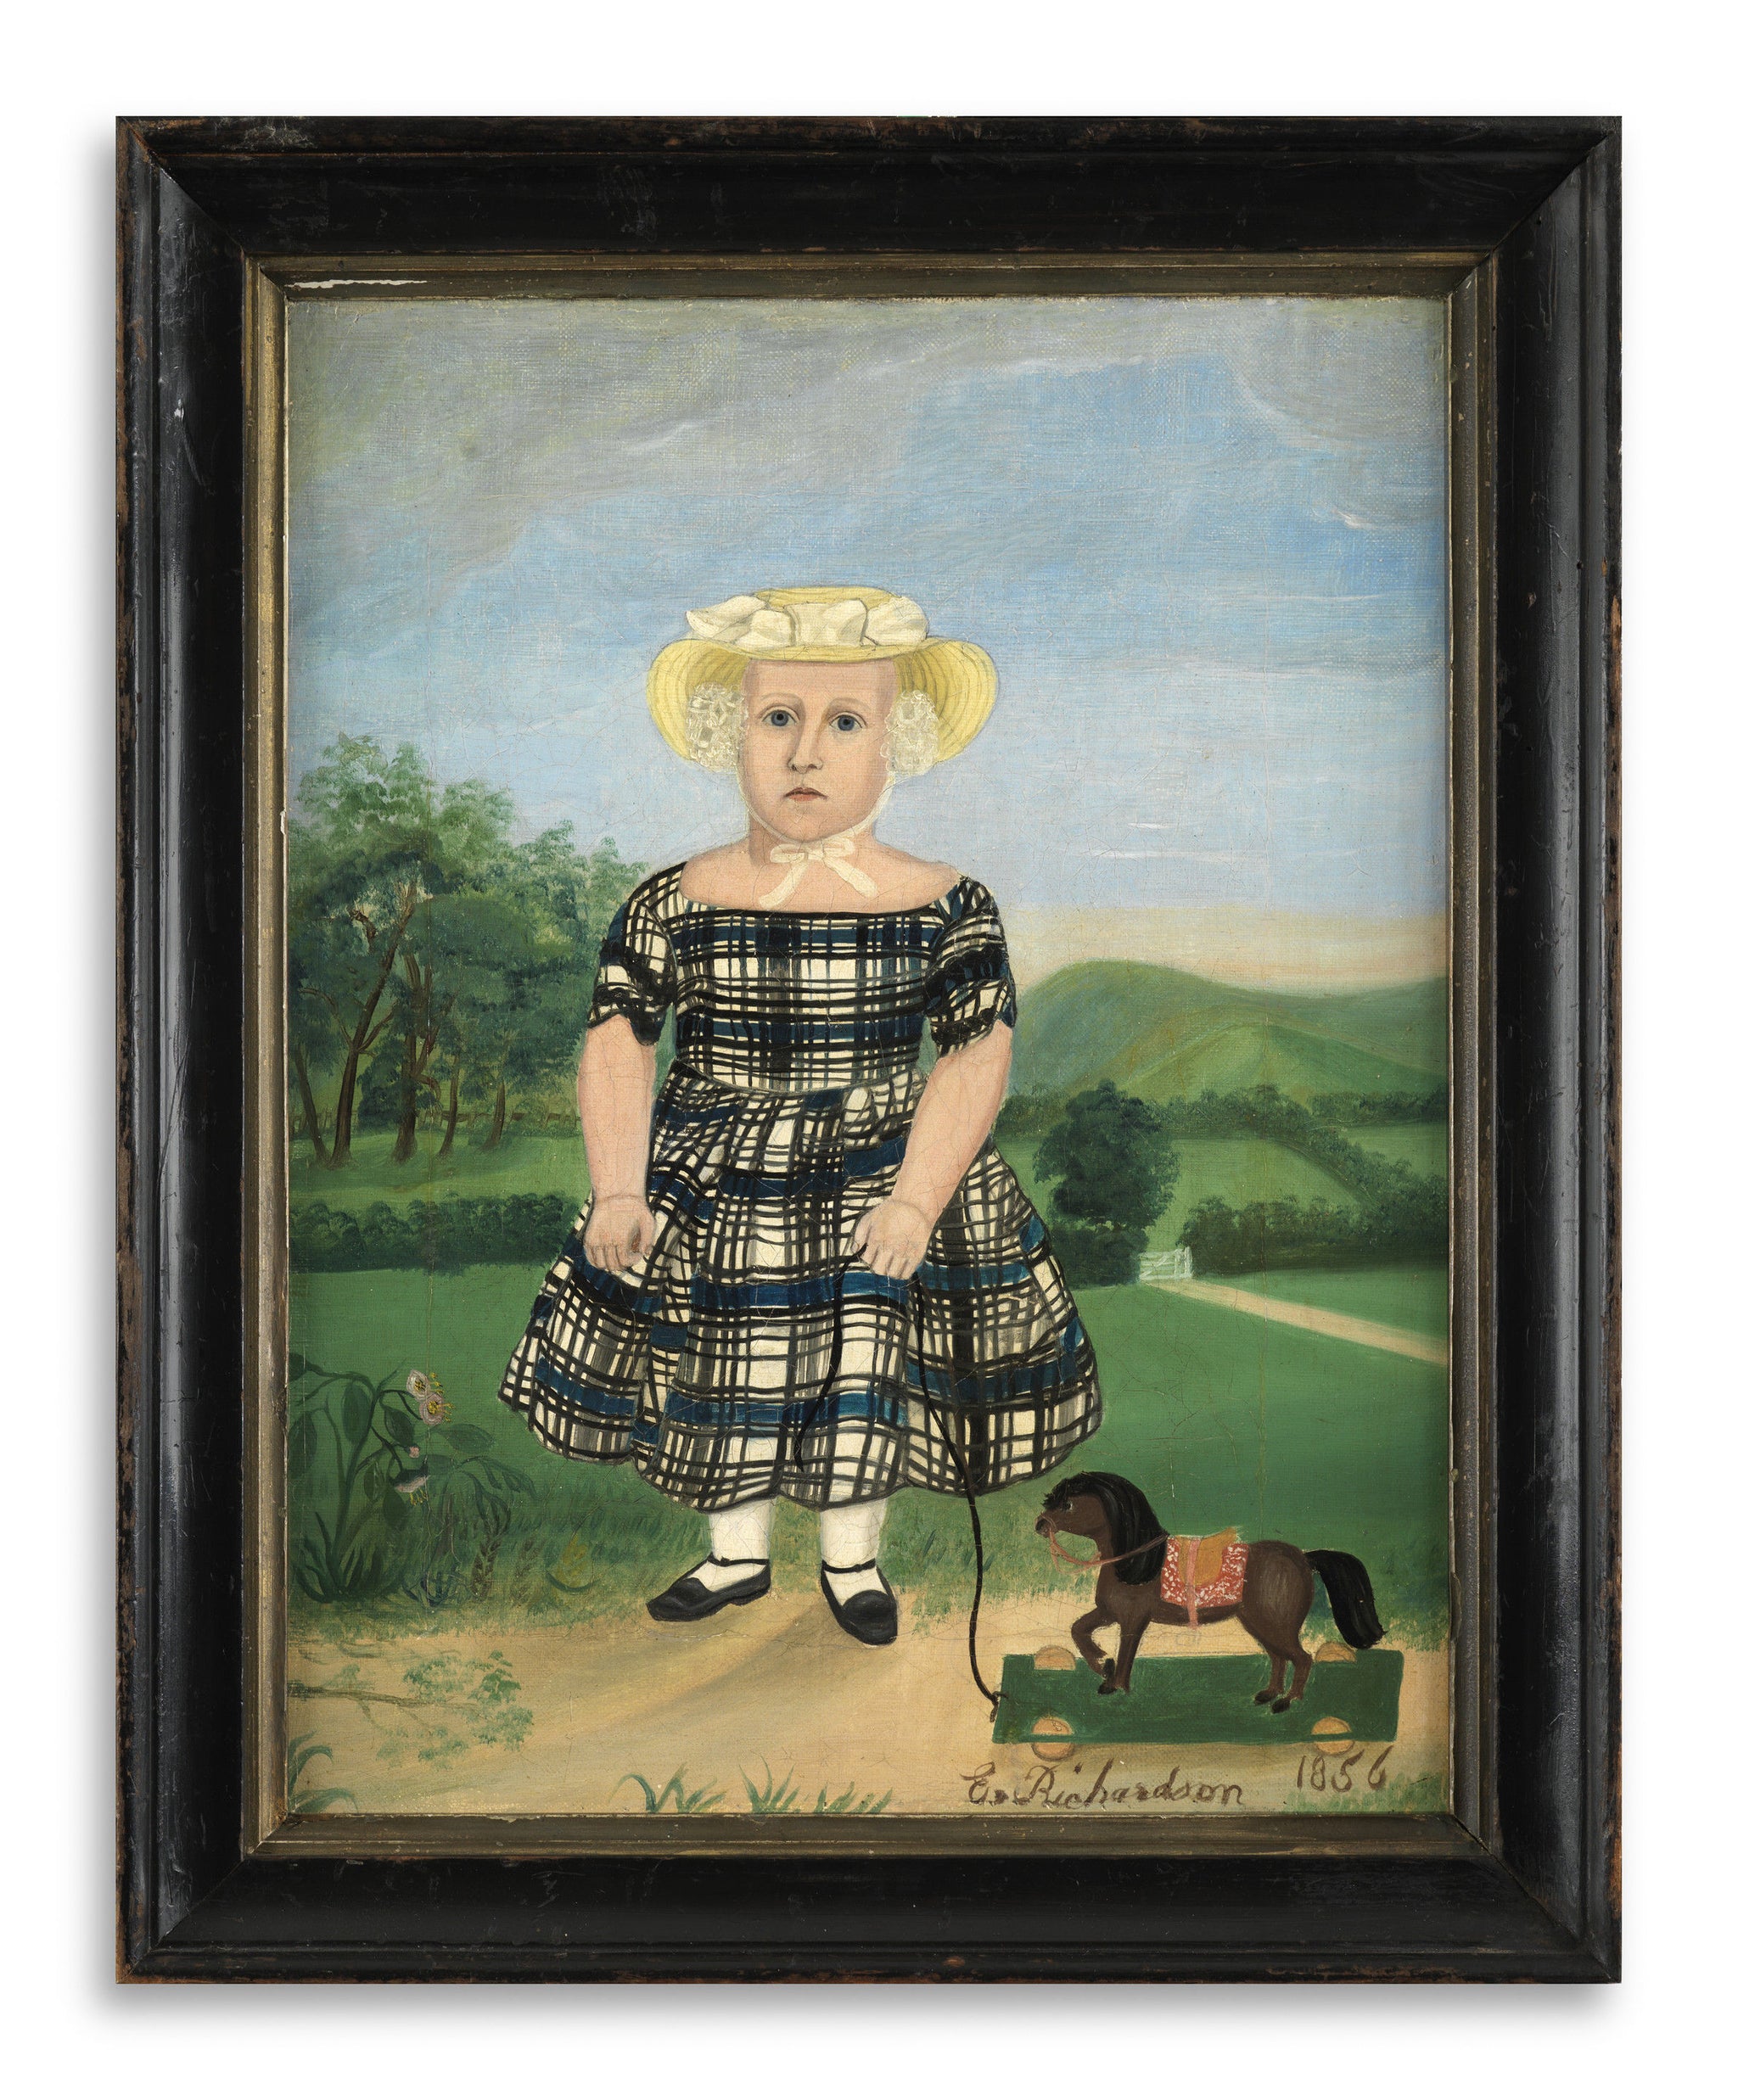 Fine Naive Portrait of a Child With a Horse Pull Toy